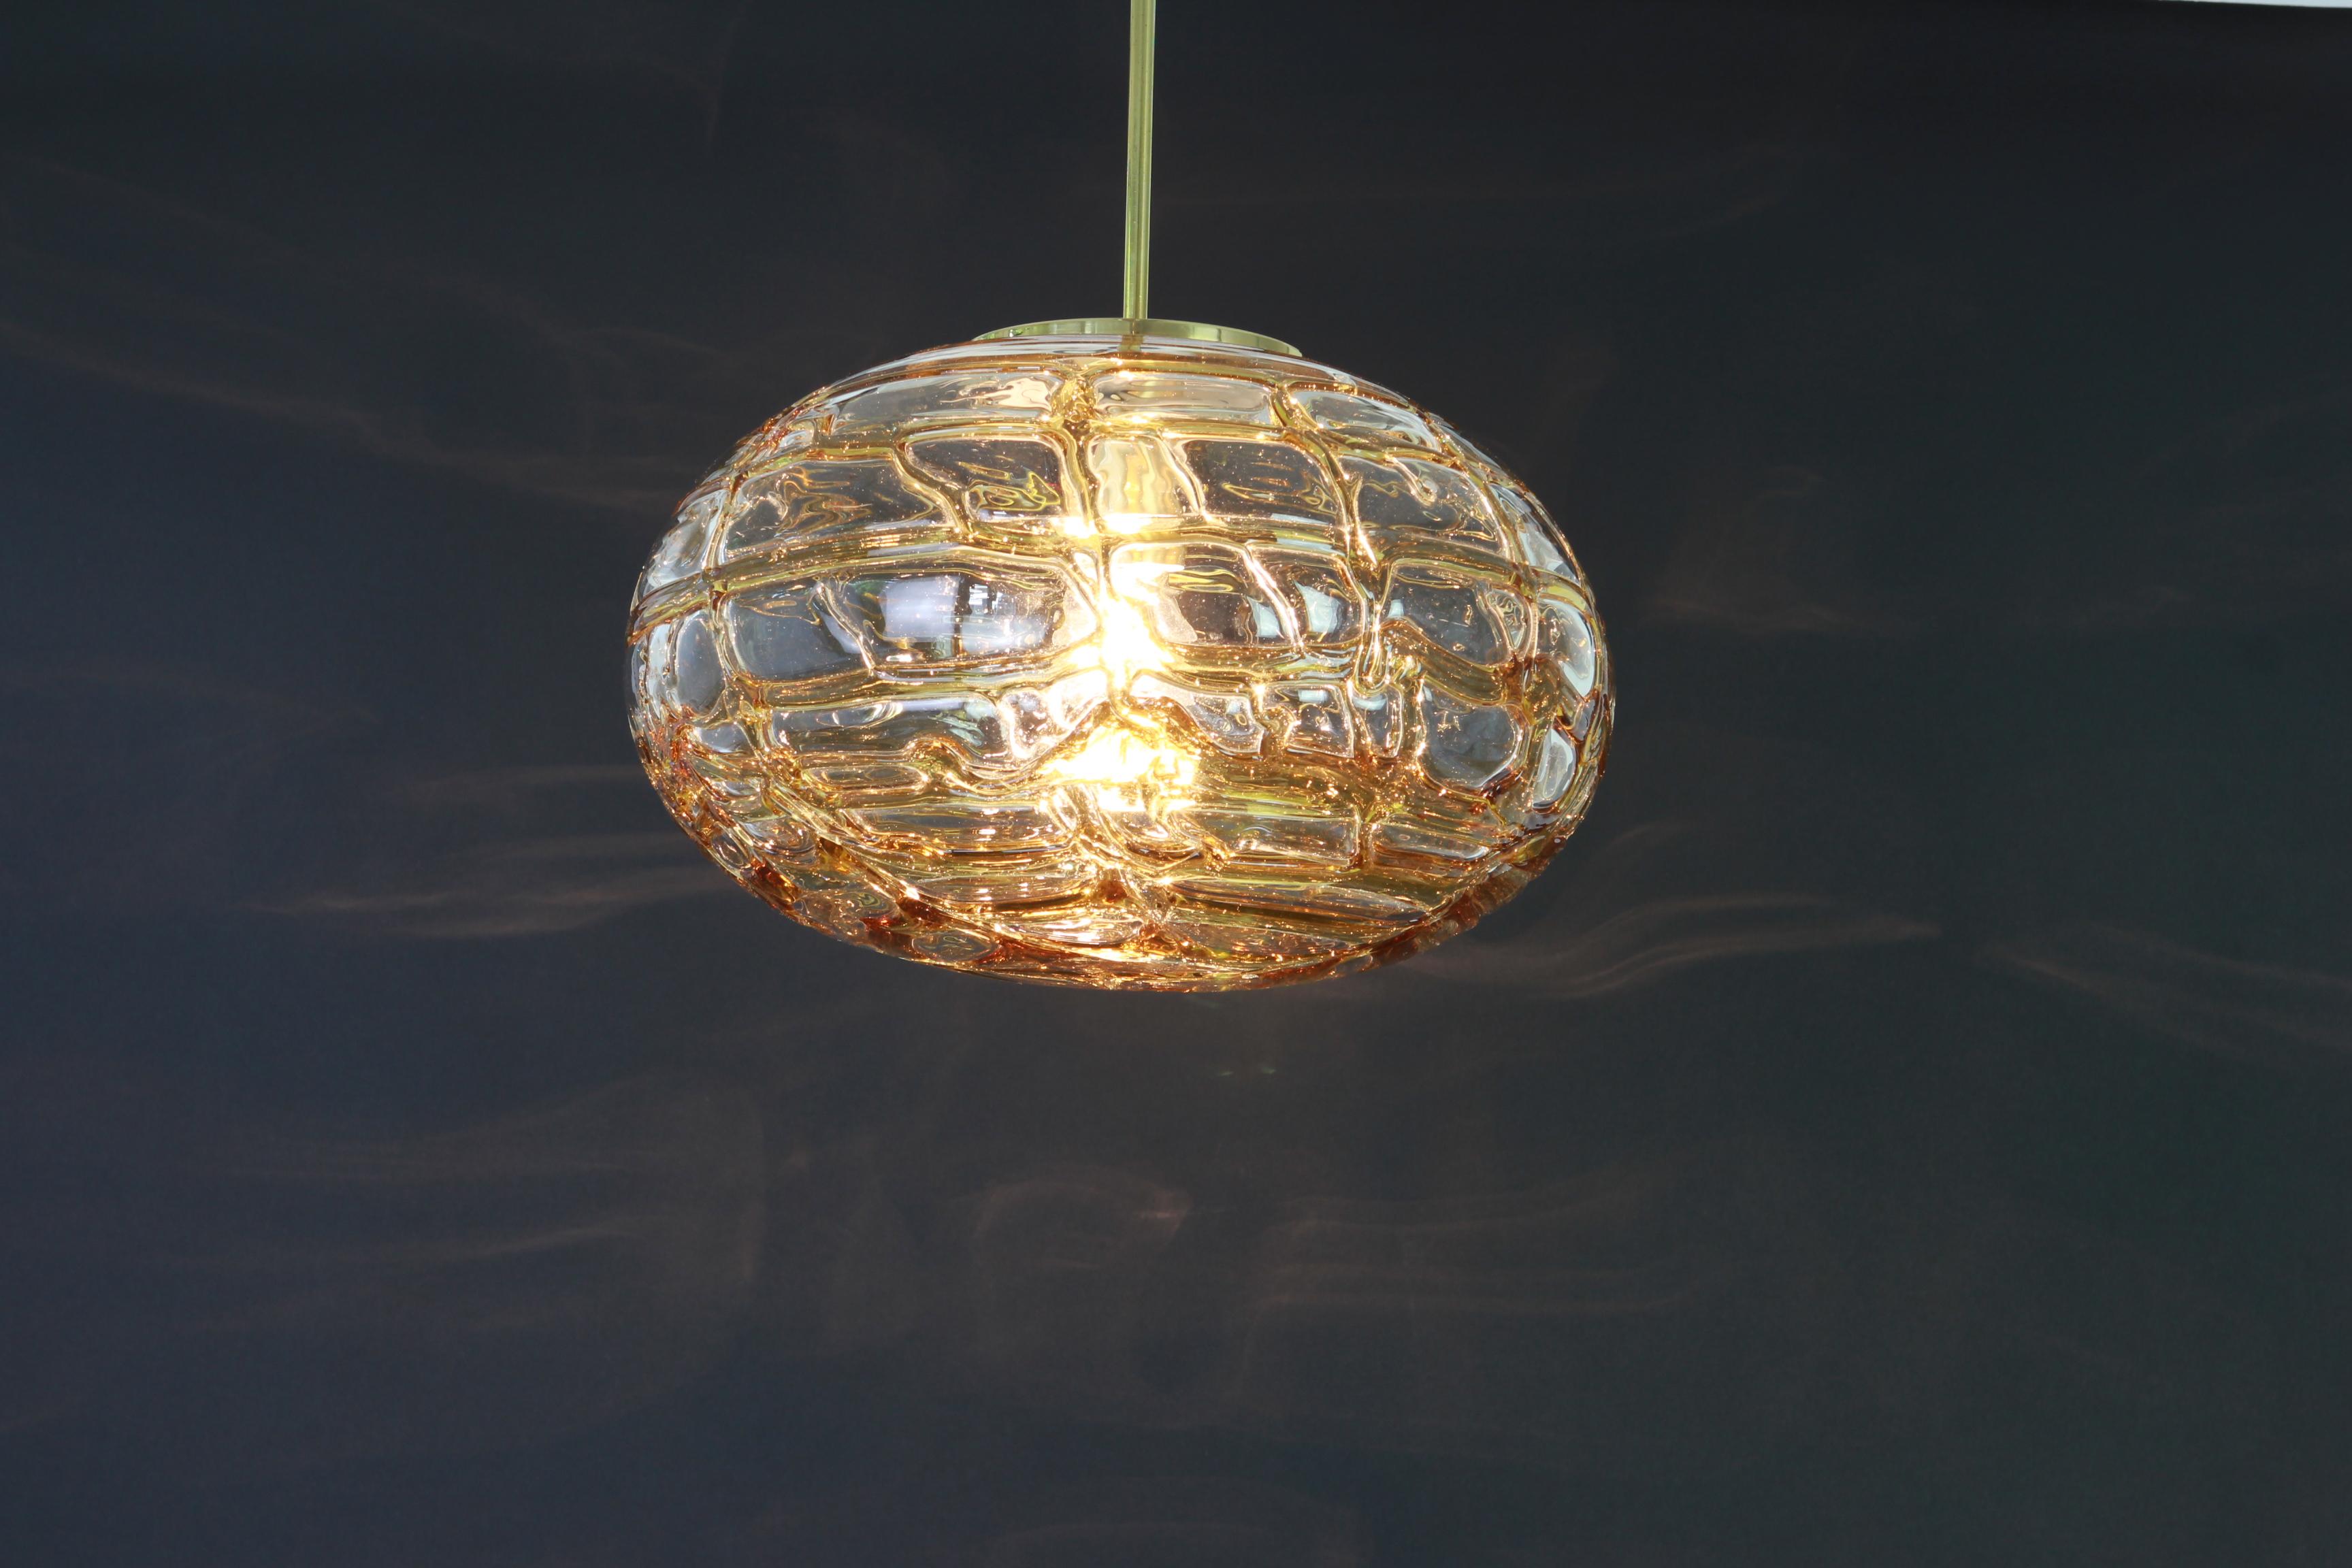 Doria ceiling light with large volcanic Murano glass ball.
High quality of materials, gives a wonderful light effect when it is on.

High quality and in very good condition. Cleaned, well-wired and ready to use. 

The fixture requires one